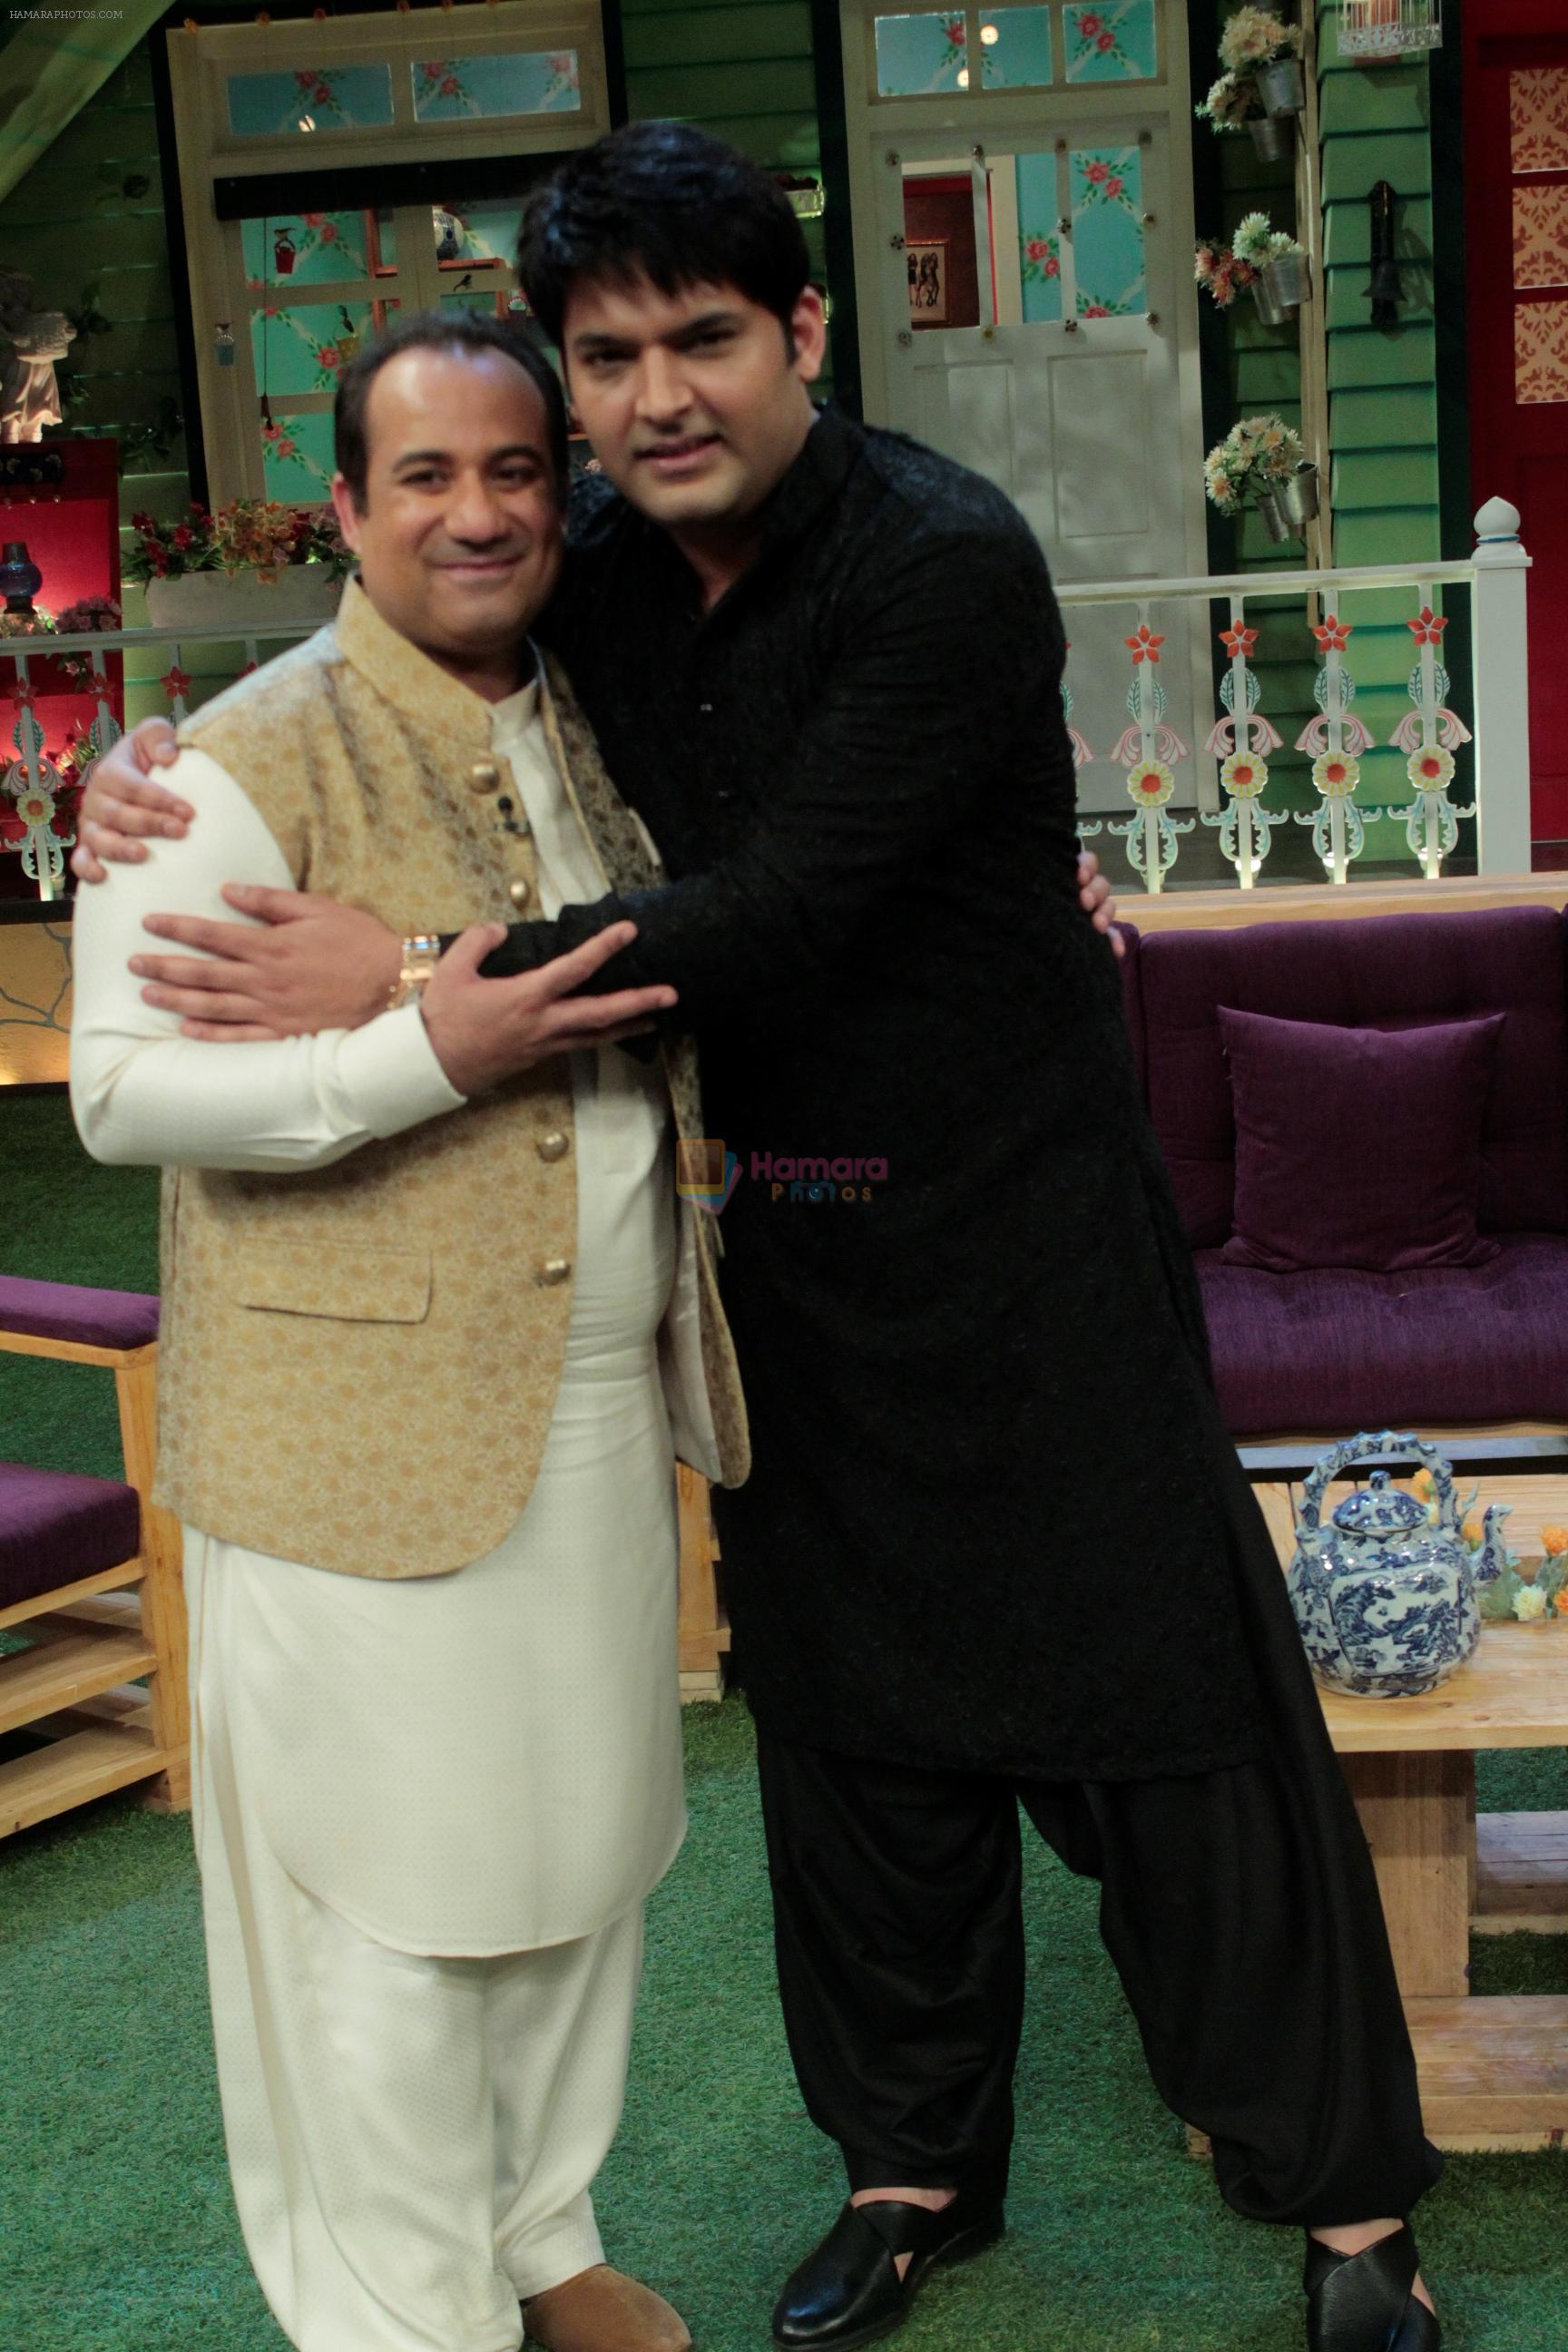 Rahat Fateh Ali Khan on The Kapil Sharma Show, The episode will be telecasted on Saturday on Sony Entertainment Television on 18th June 2016